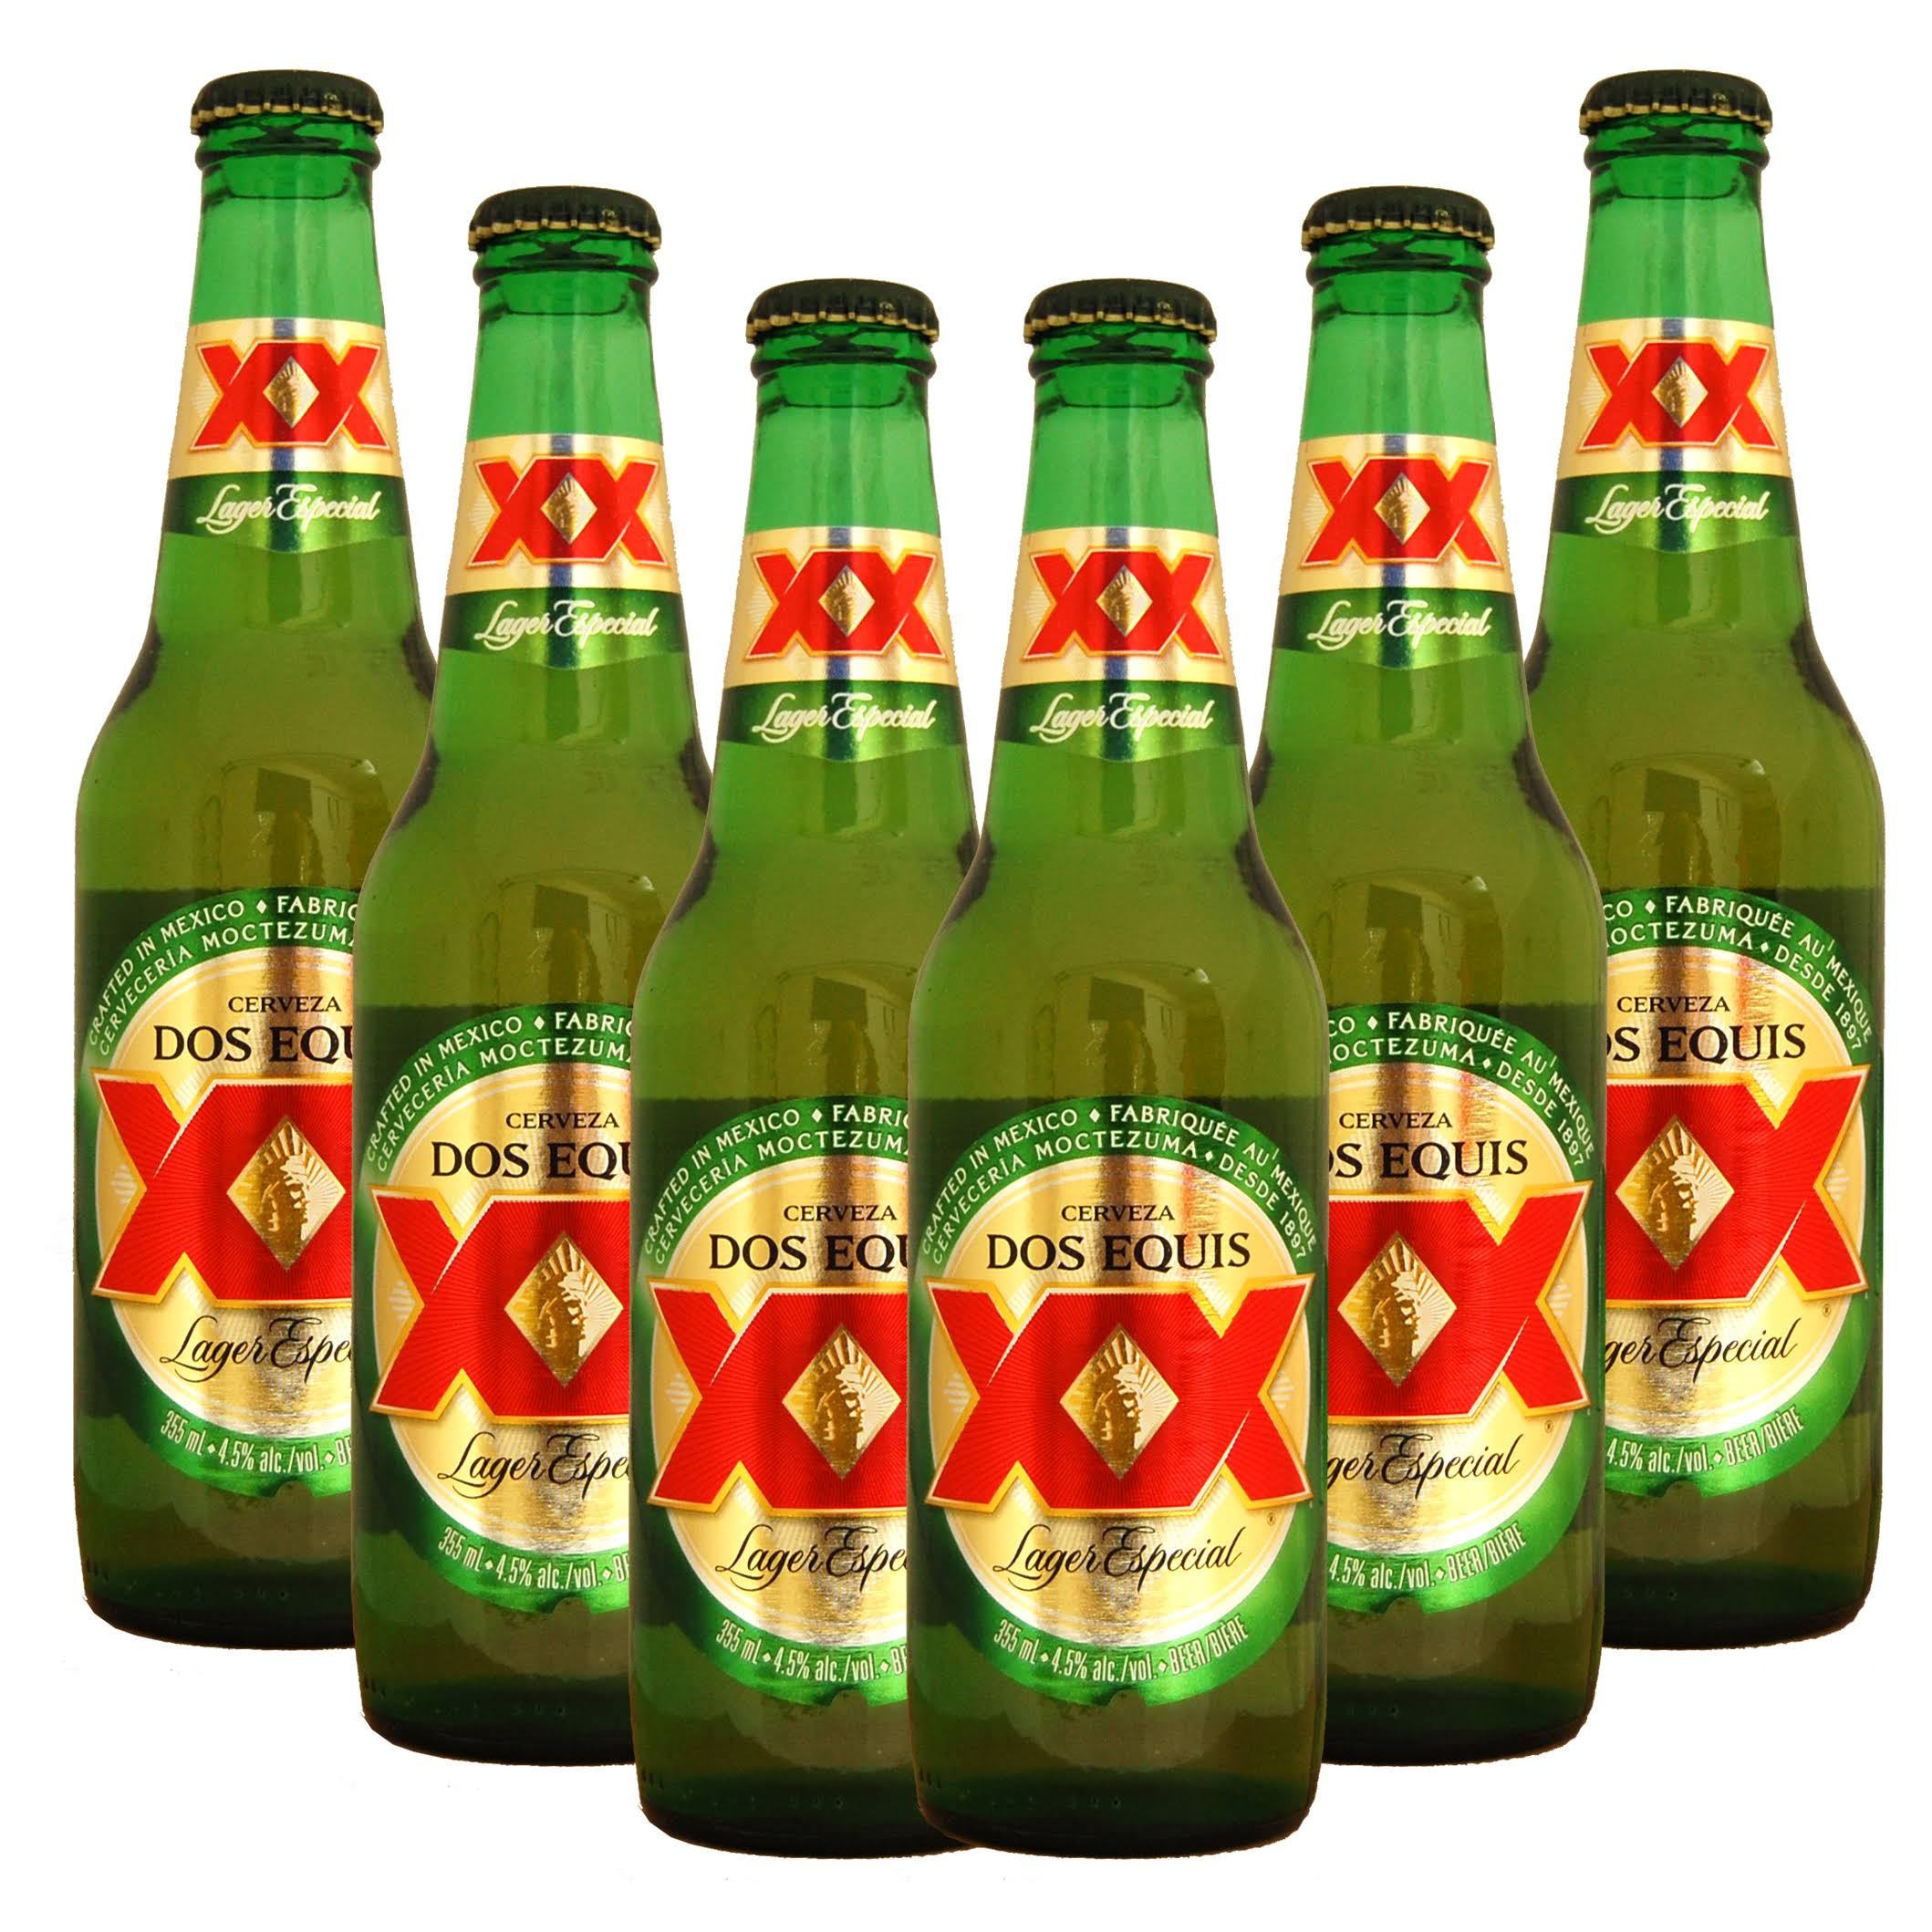 Dos Equis XX Special Lager Beer - 12oz, 6pk